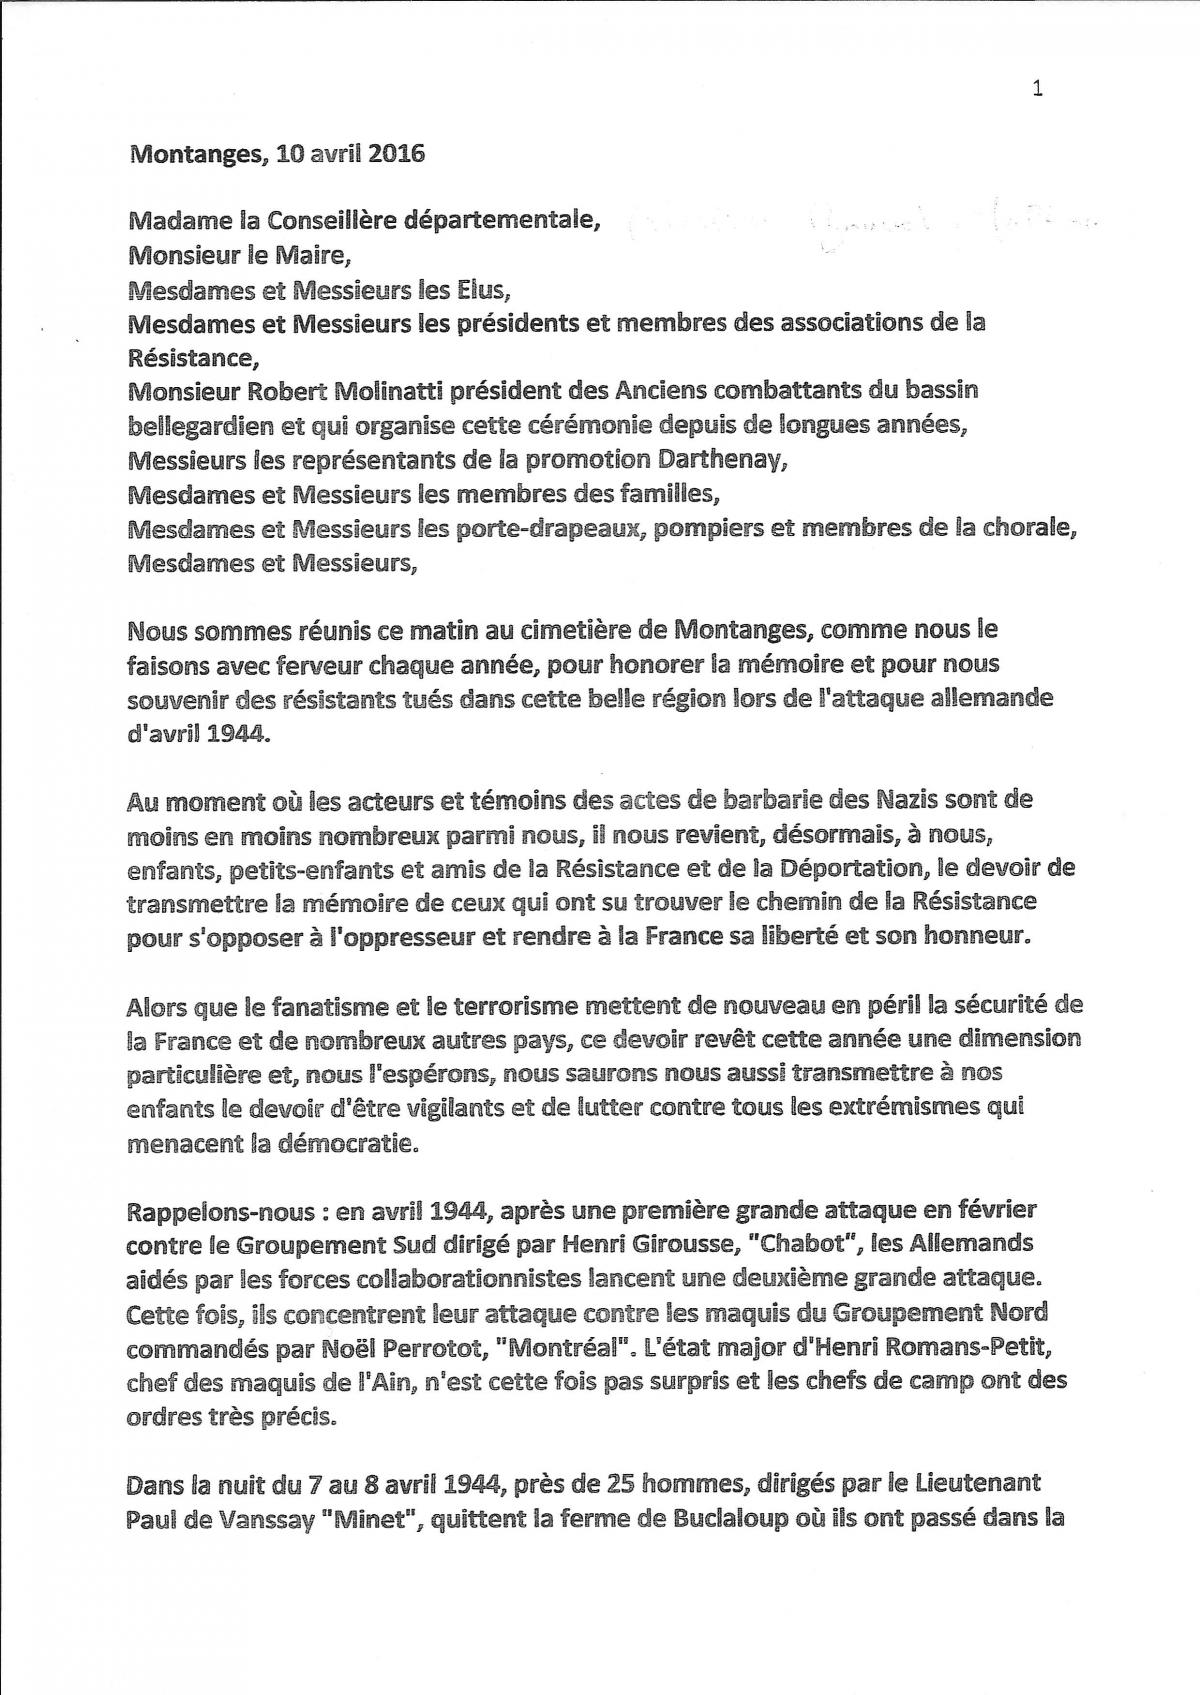 MONTANGES discours page 1